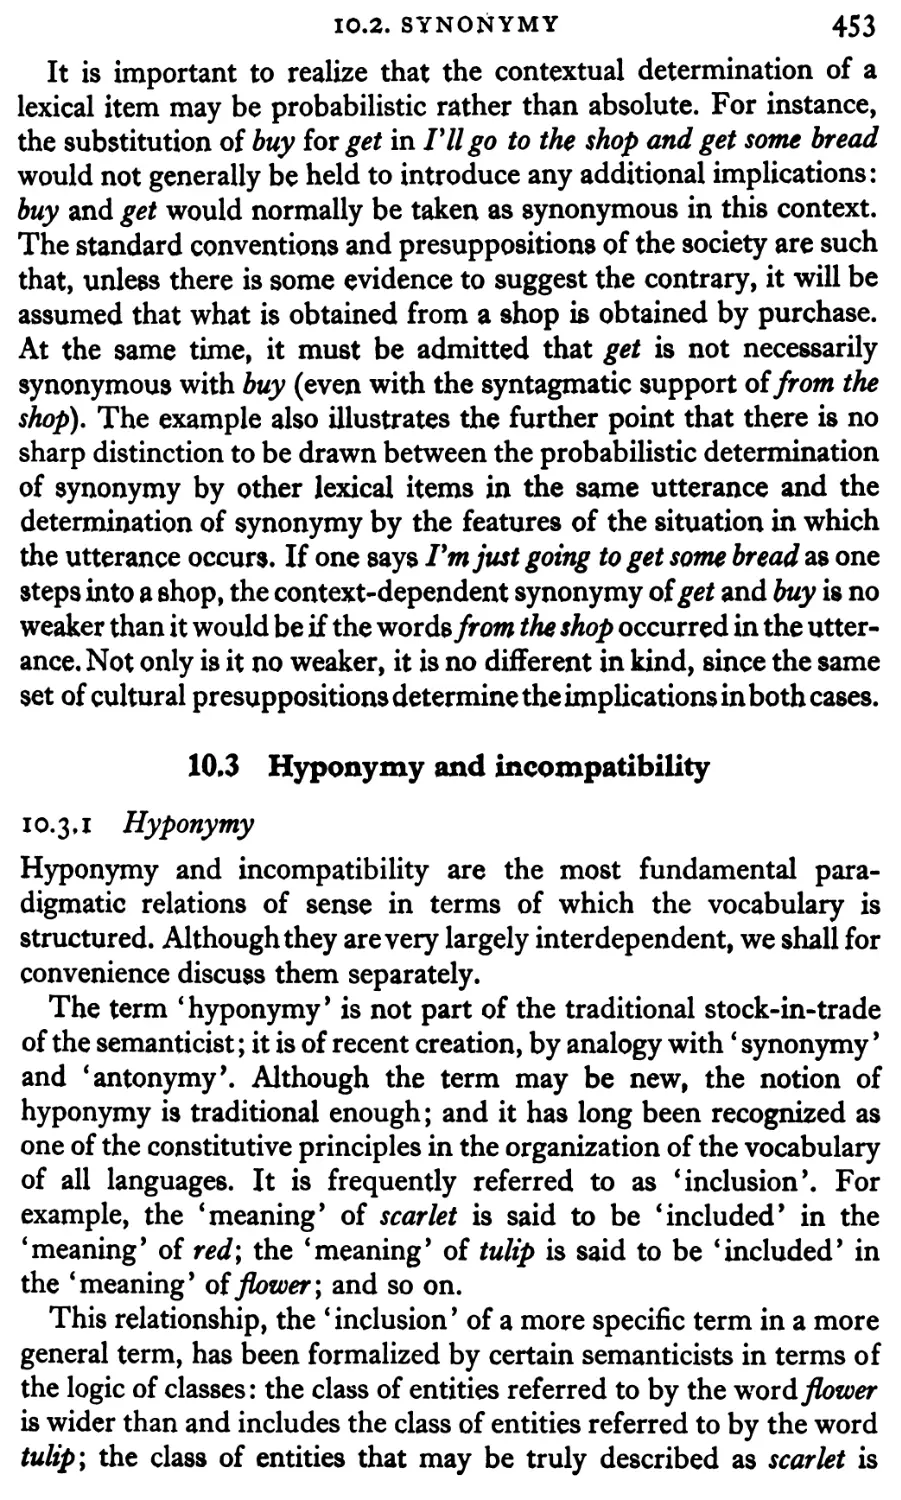 10.3 Hypmymy and incompatibility